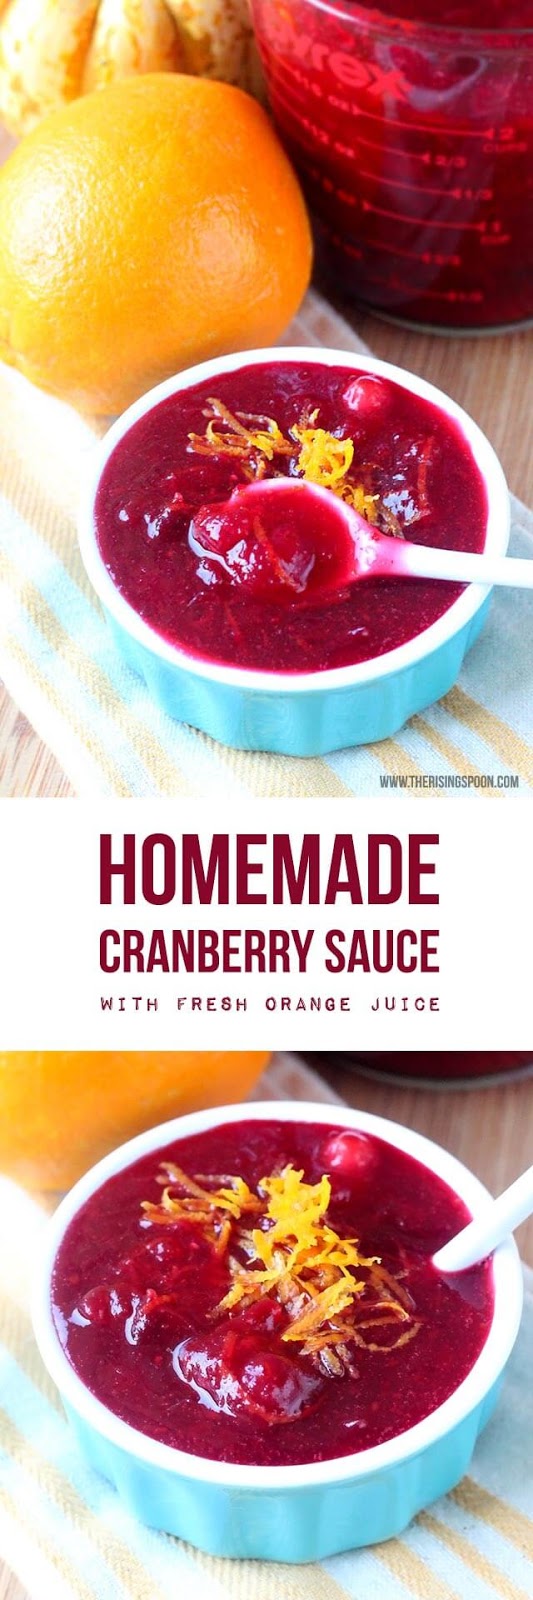 I love this easy homemade cranberry sauce recipe! It's so much better than the canned version, uses honey or sugar, and only takes about 25 minutes on the stovetop. Perfect for Thanksgiving or Christmas!